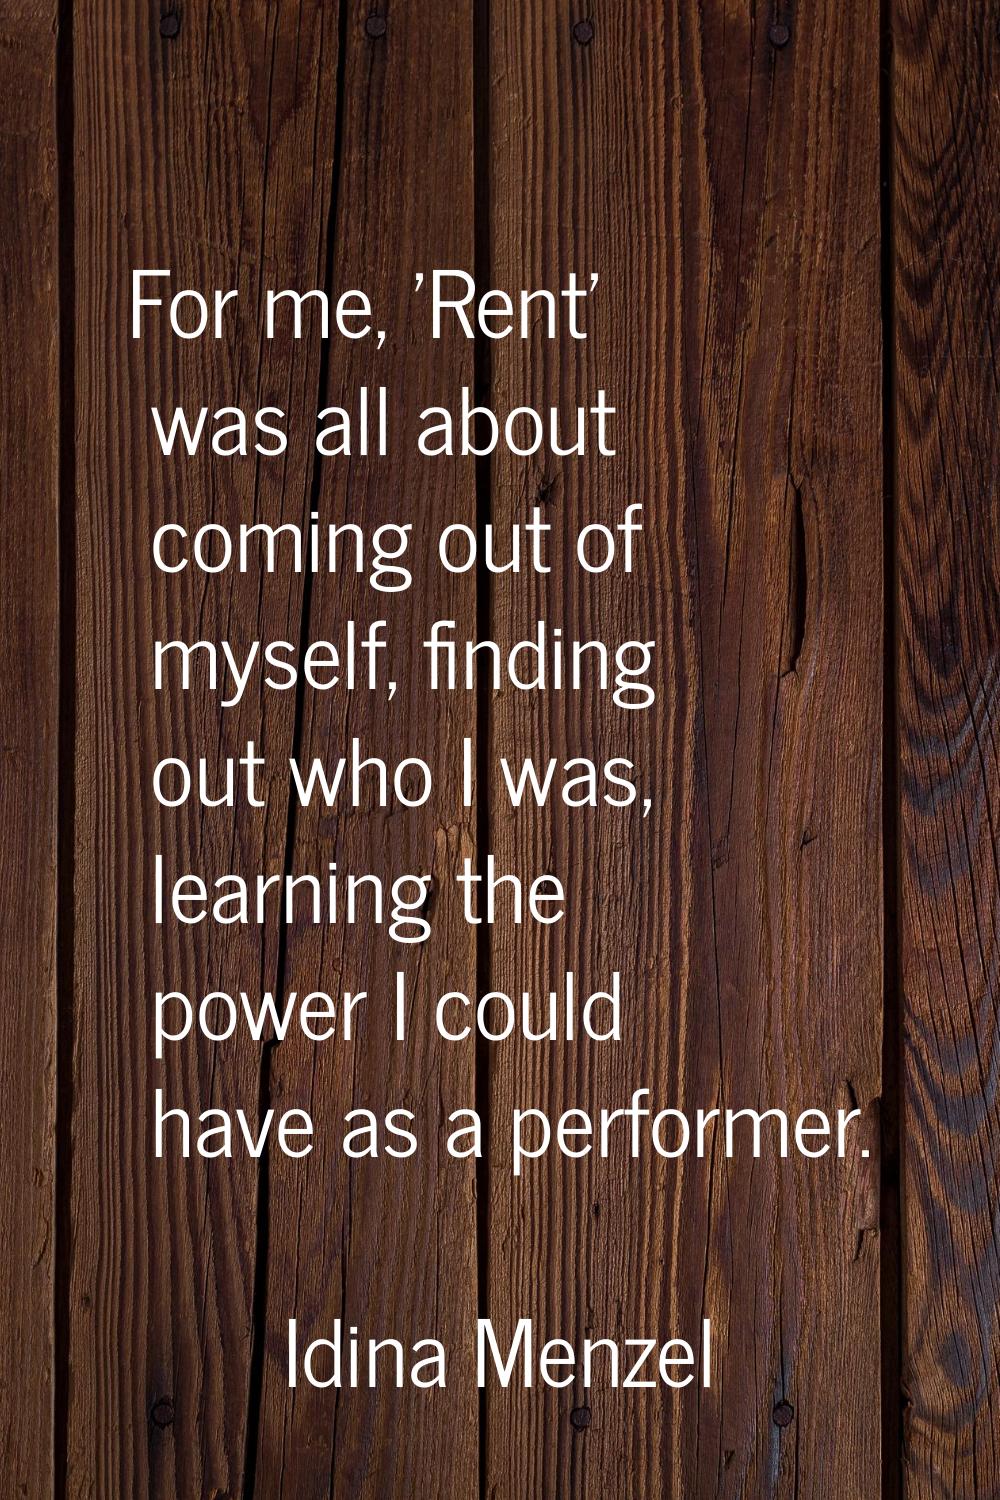 For me, 'Rent' was all about coming out of myself, finding out who I was, learning the power I coul